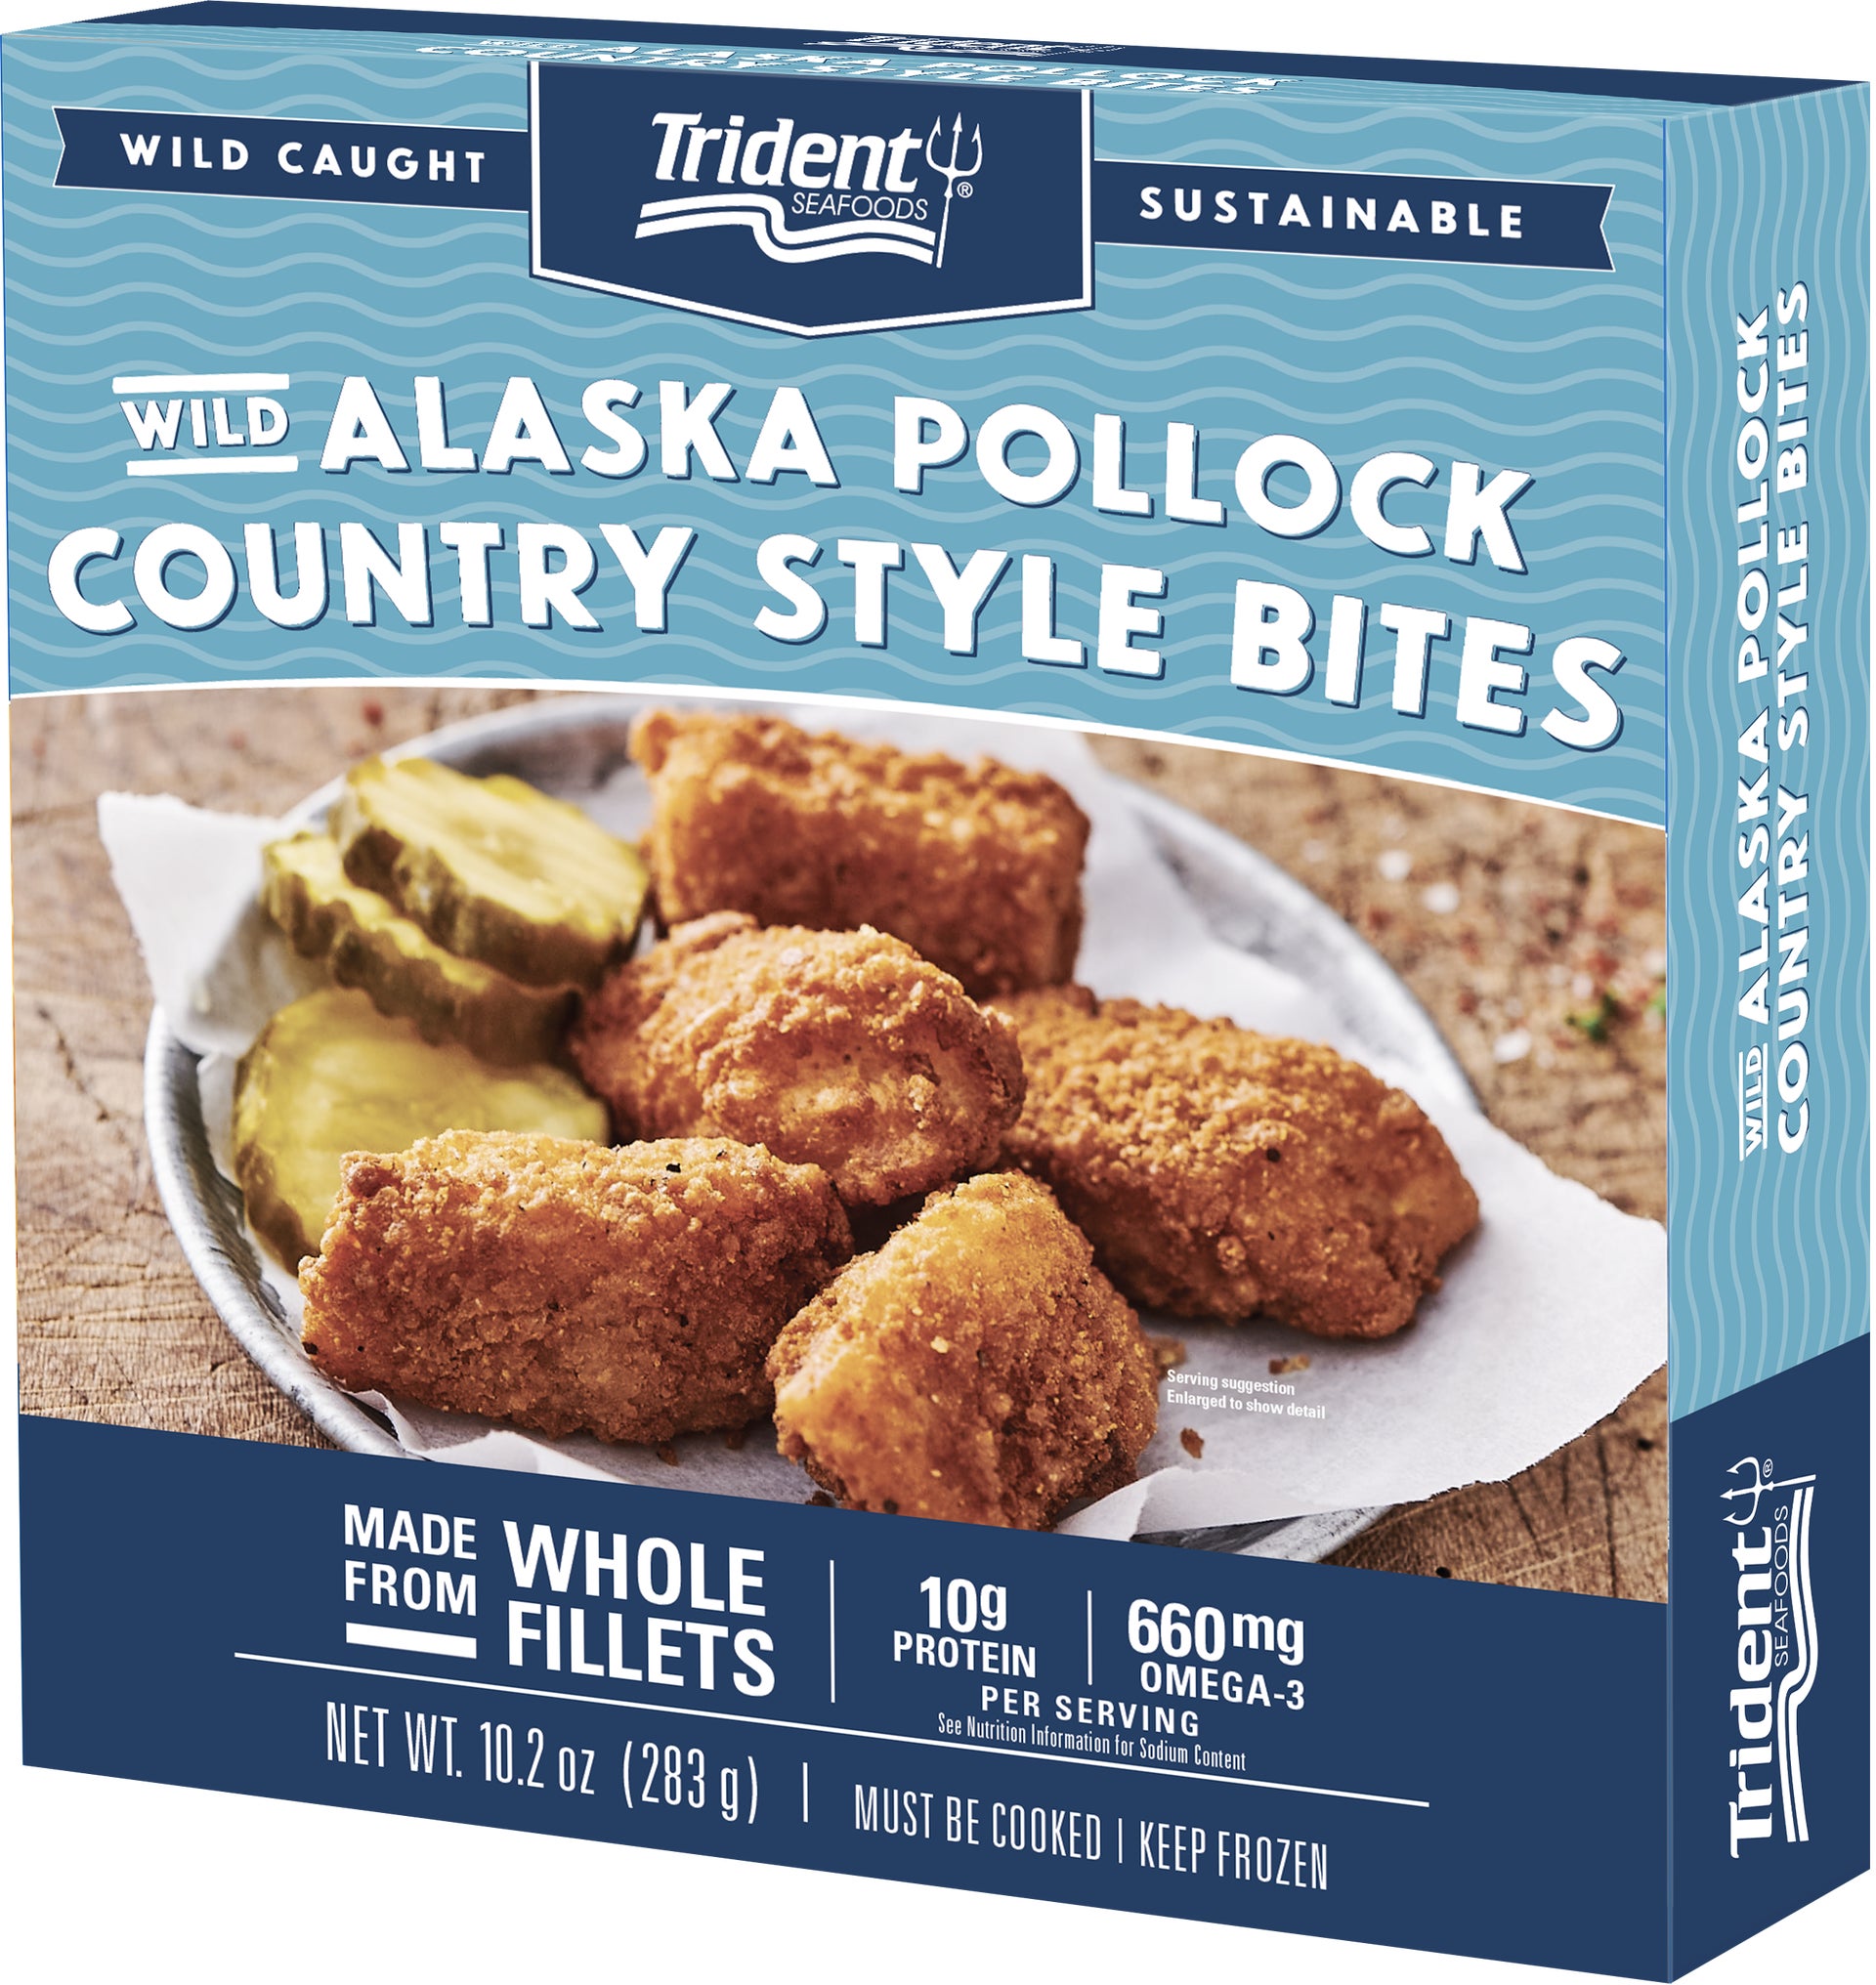 Wild Alaska Pollock Country Style Bites Packaging